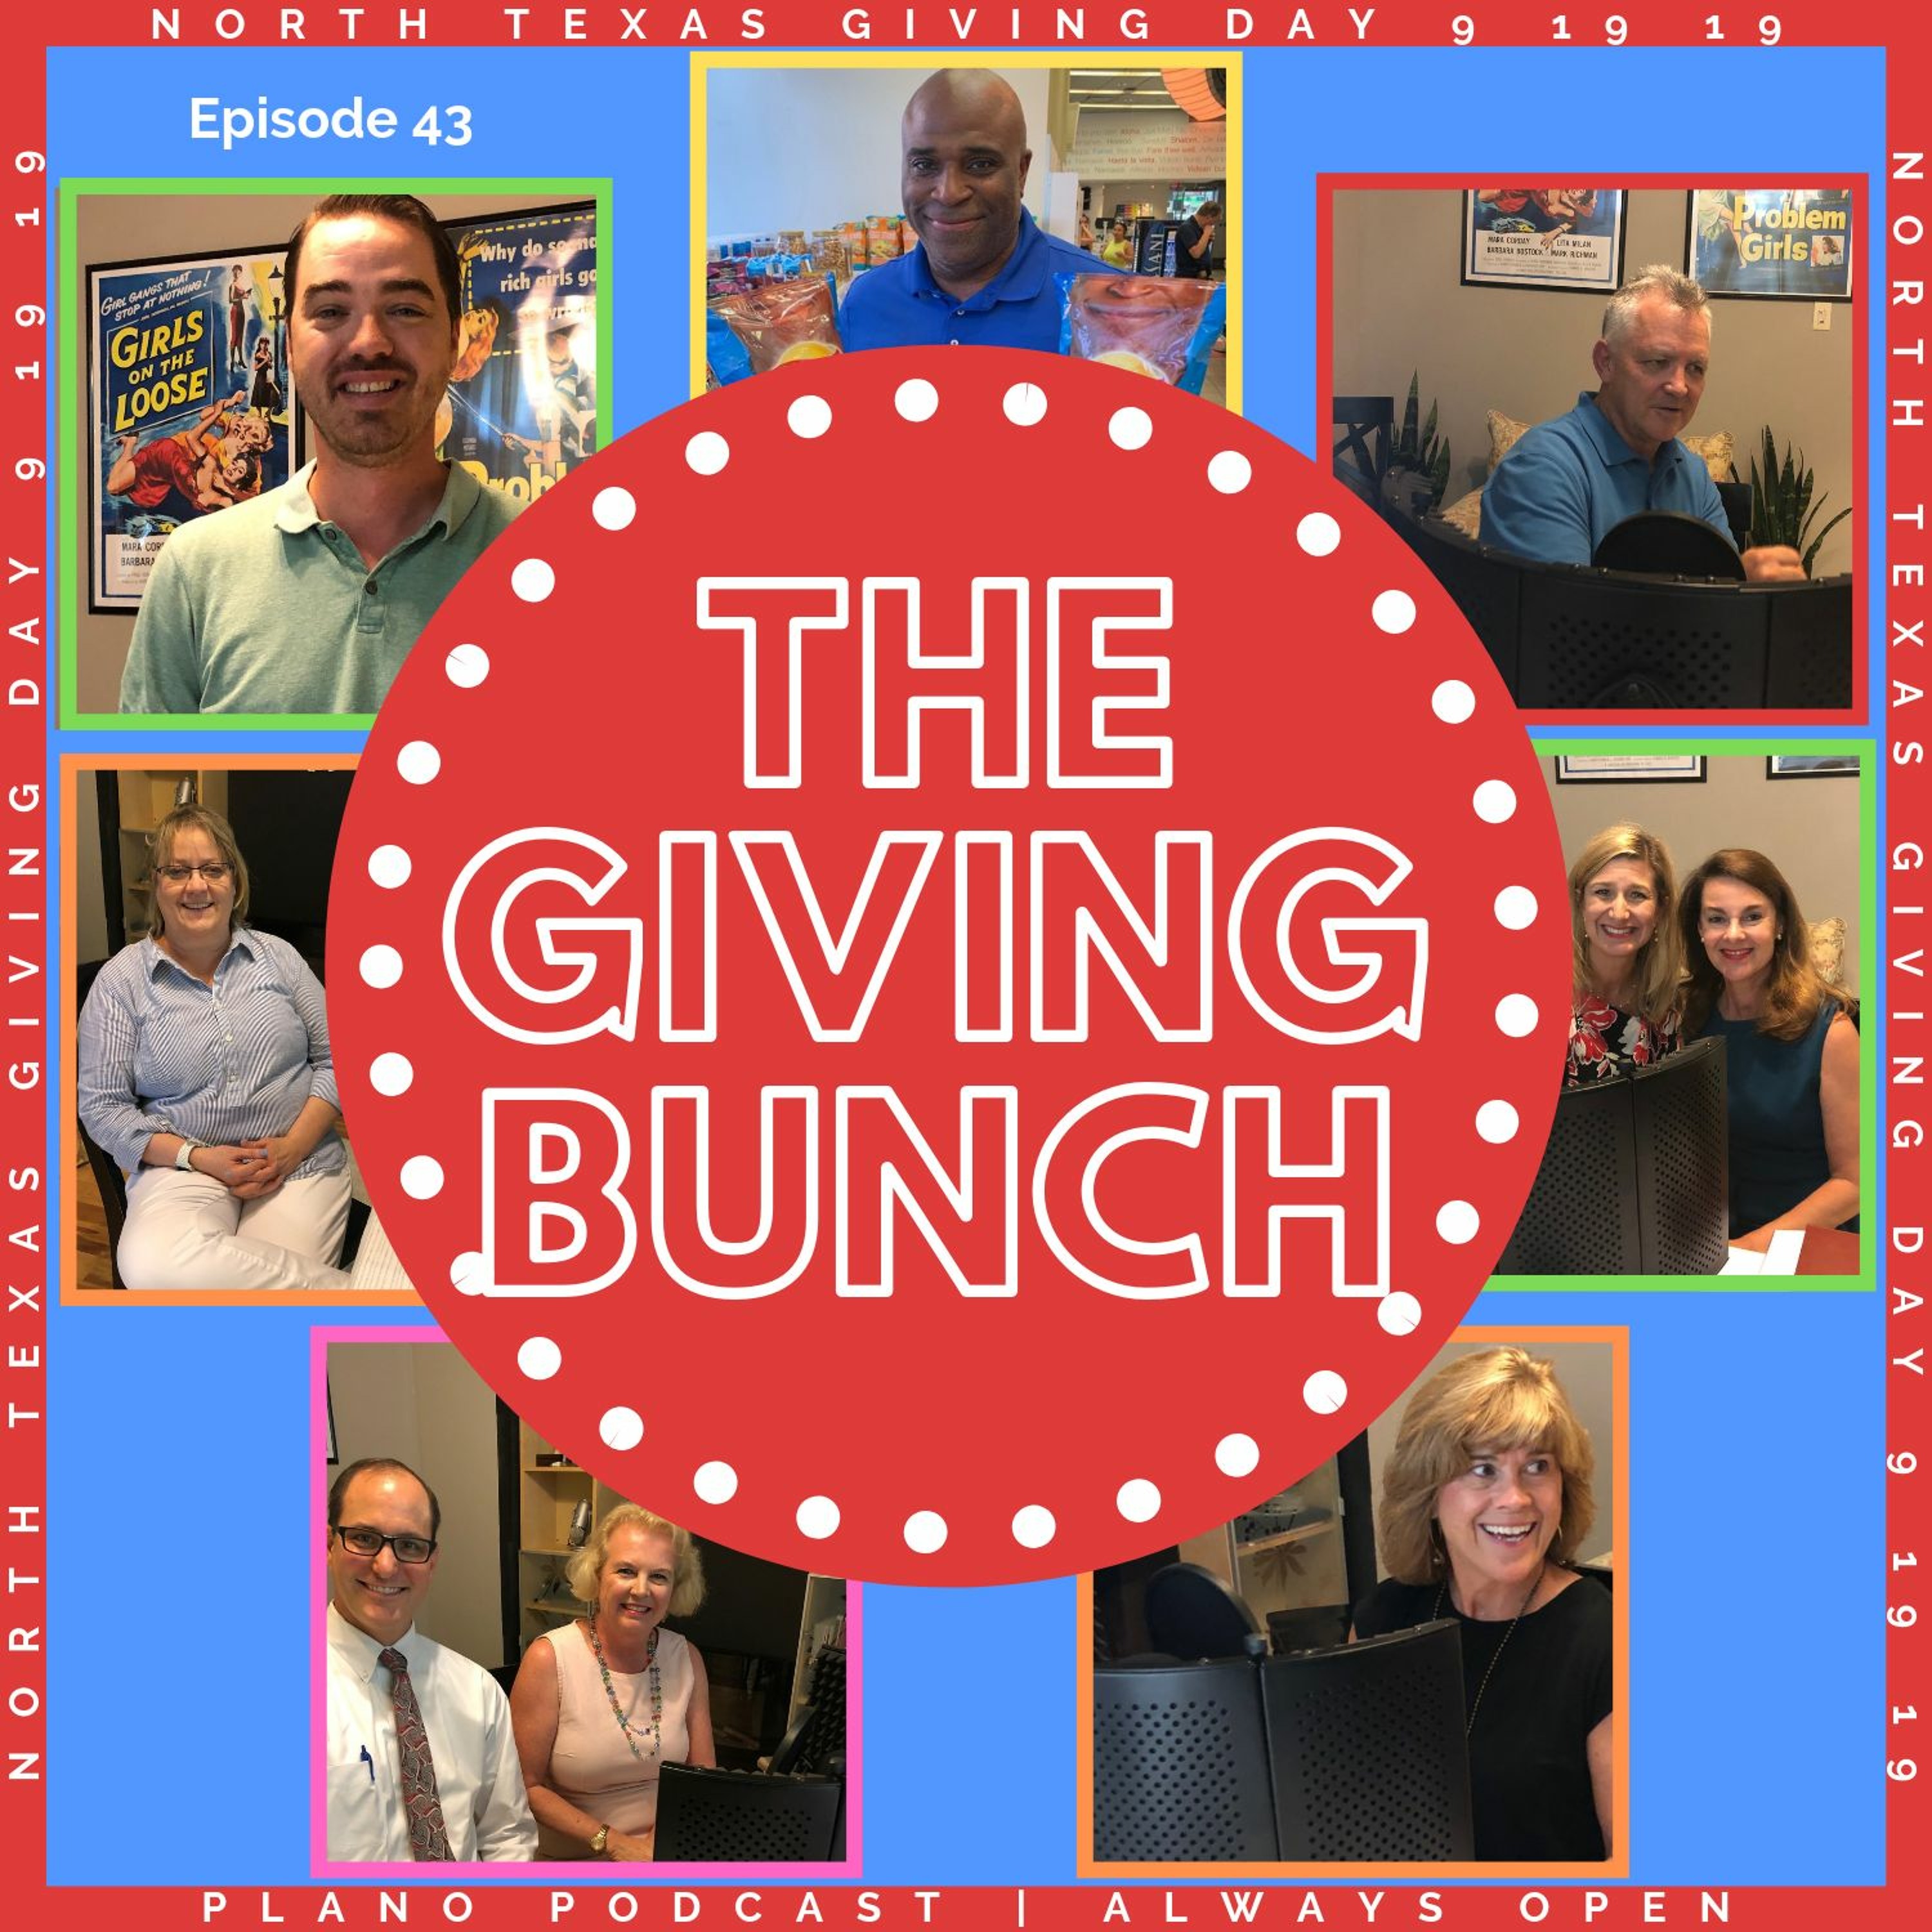 Episode 43 | North Texas Giving Day | The Giving Bunch